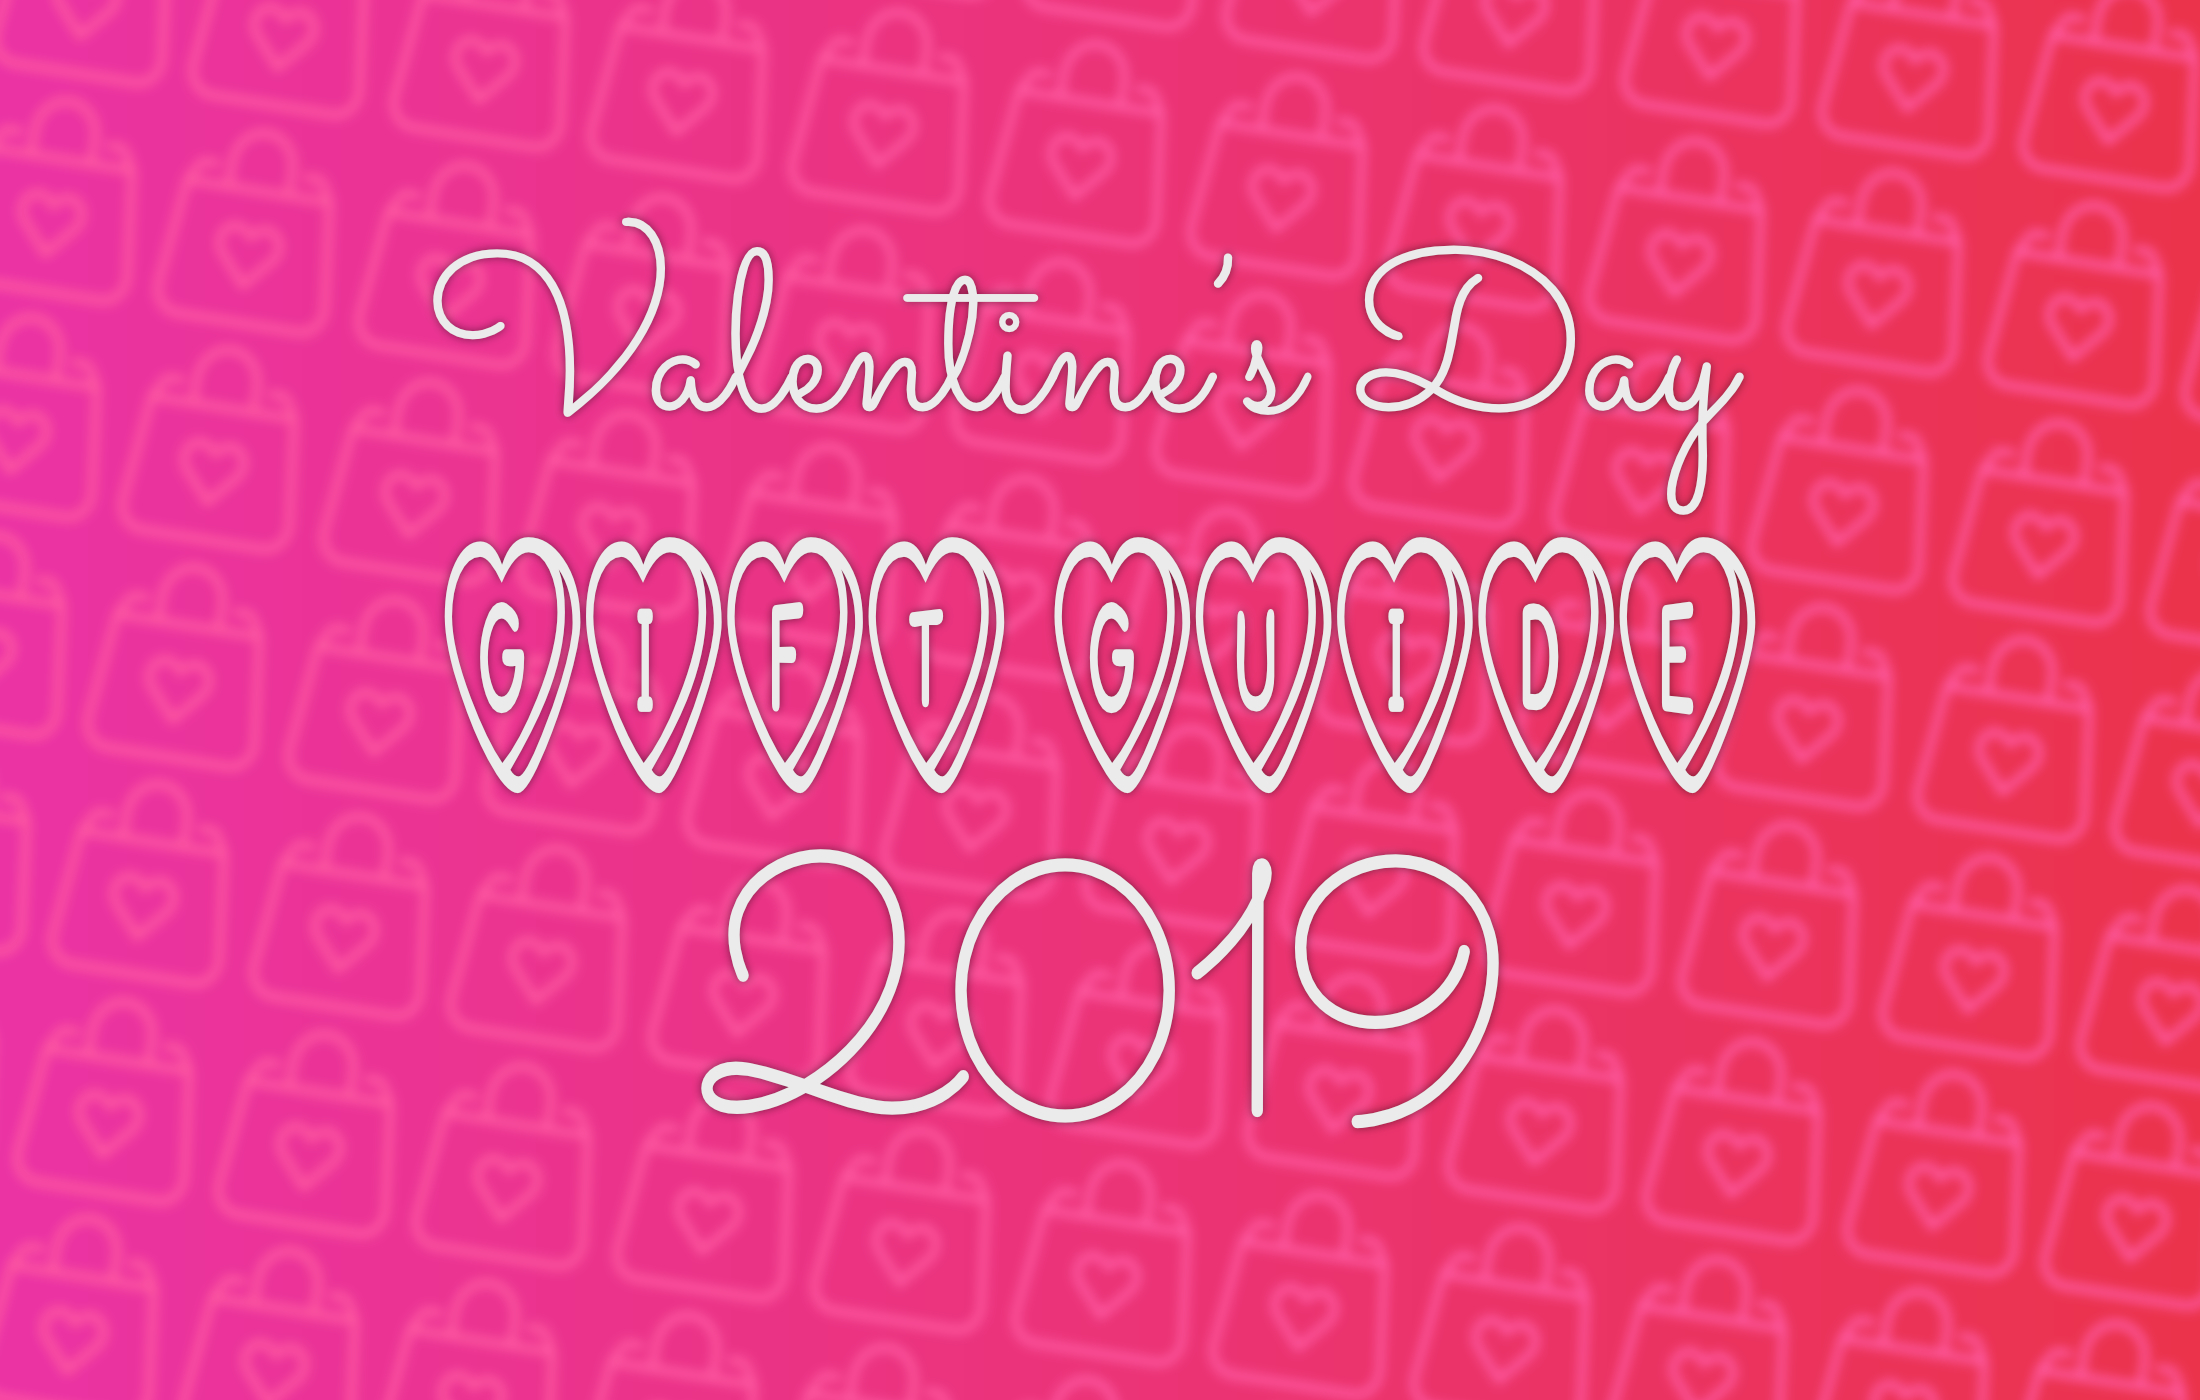 Valentine’s Day gift guide 2019